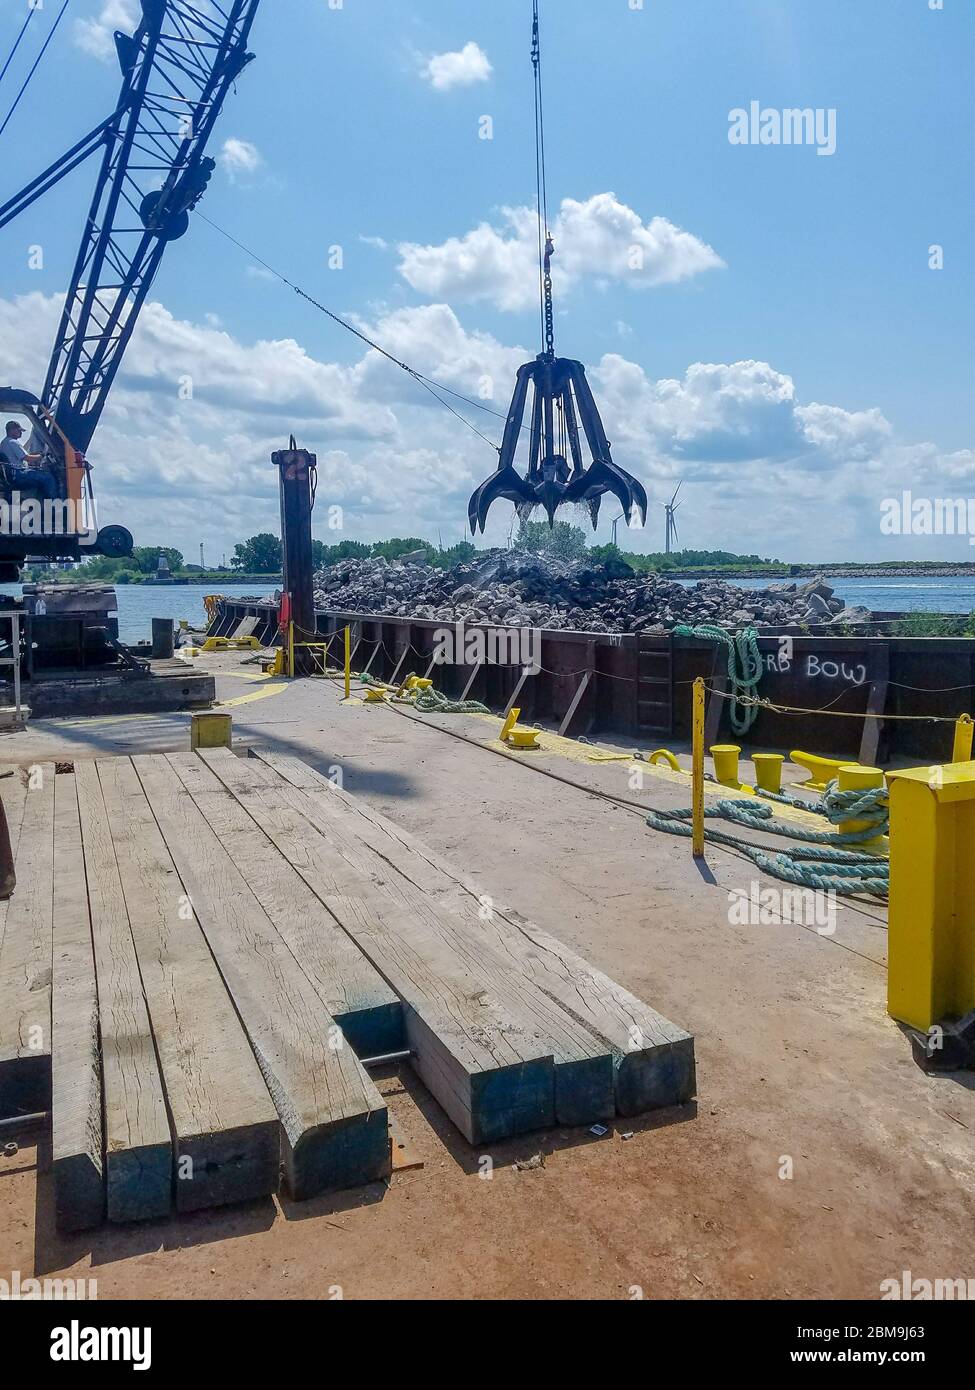 The U.S. Army Corps of Engineers Buffalo District makes repairs to damaged areas of critical need on the Buffalo south breakwater located in the Buffalo Harbor, Buffalo, NY, July 26, 2019.     Credit: Andrew Kist, Buffalo District engineer Stock Photo